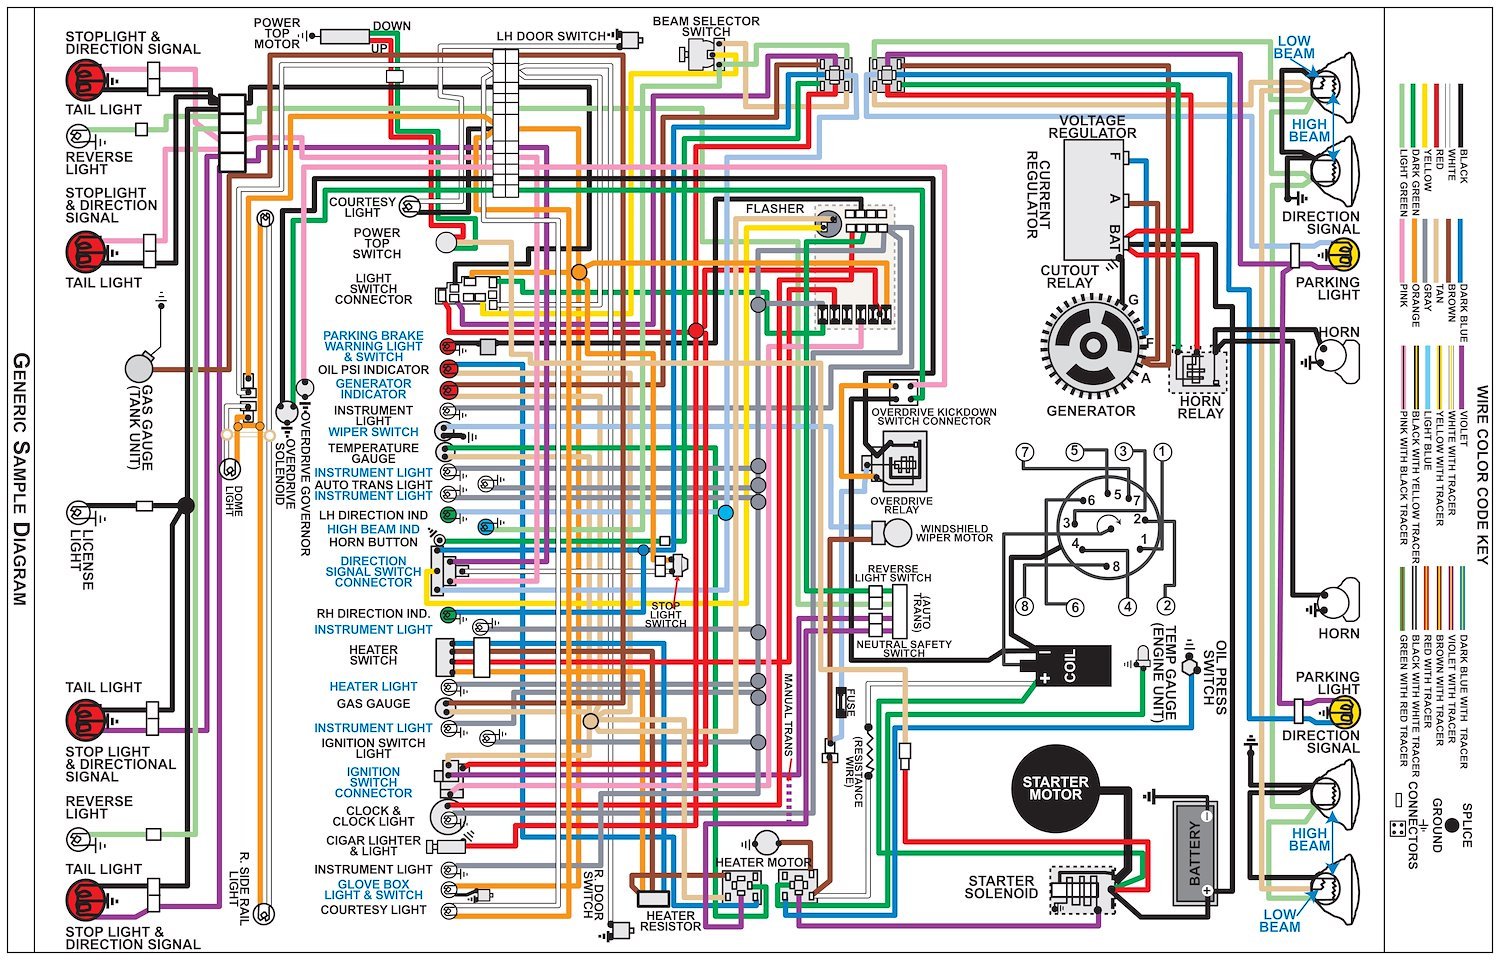 Wiring Diagram for 1969 Plymouth Barracuda, 11 in x 17 in., Laminated